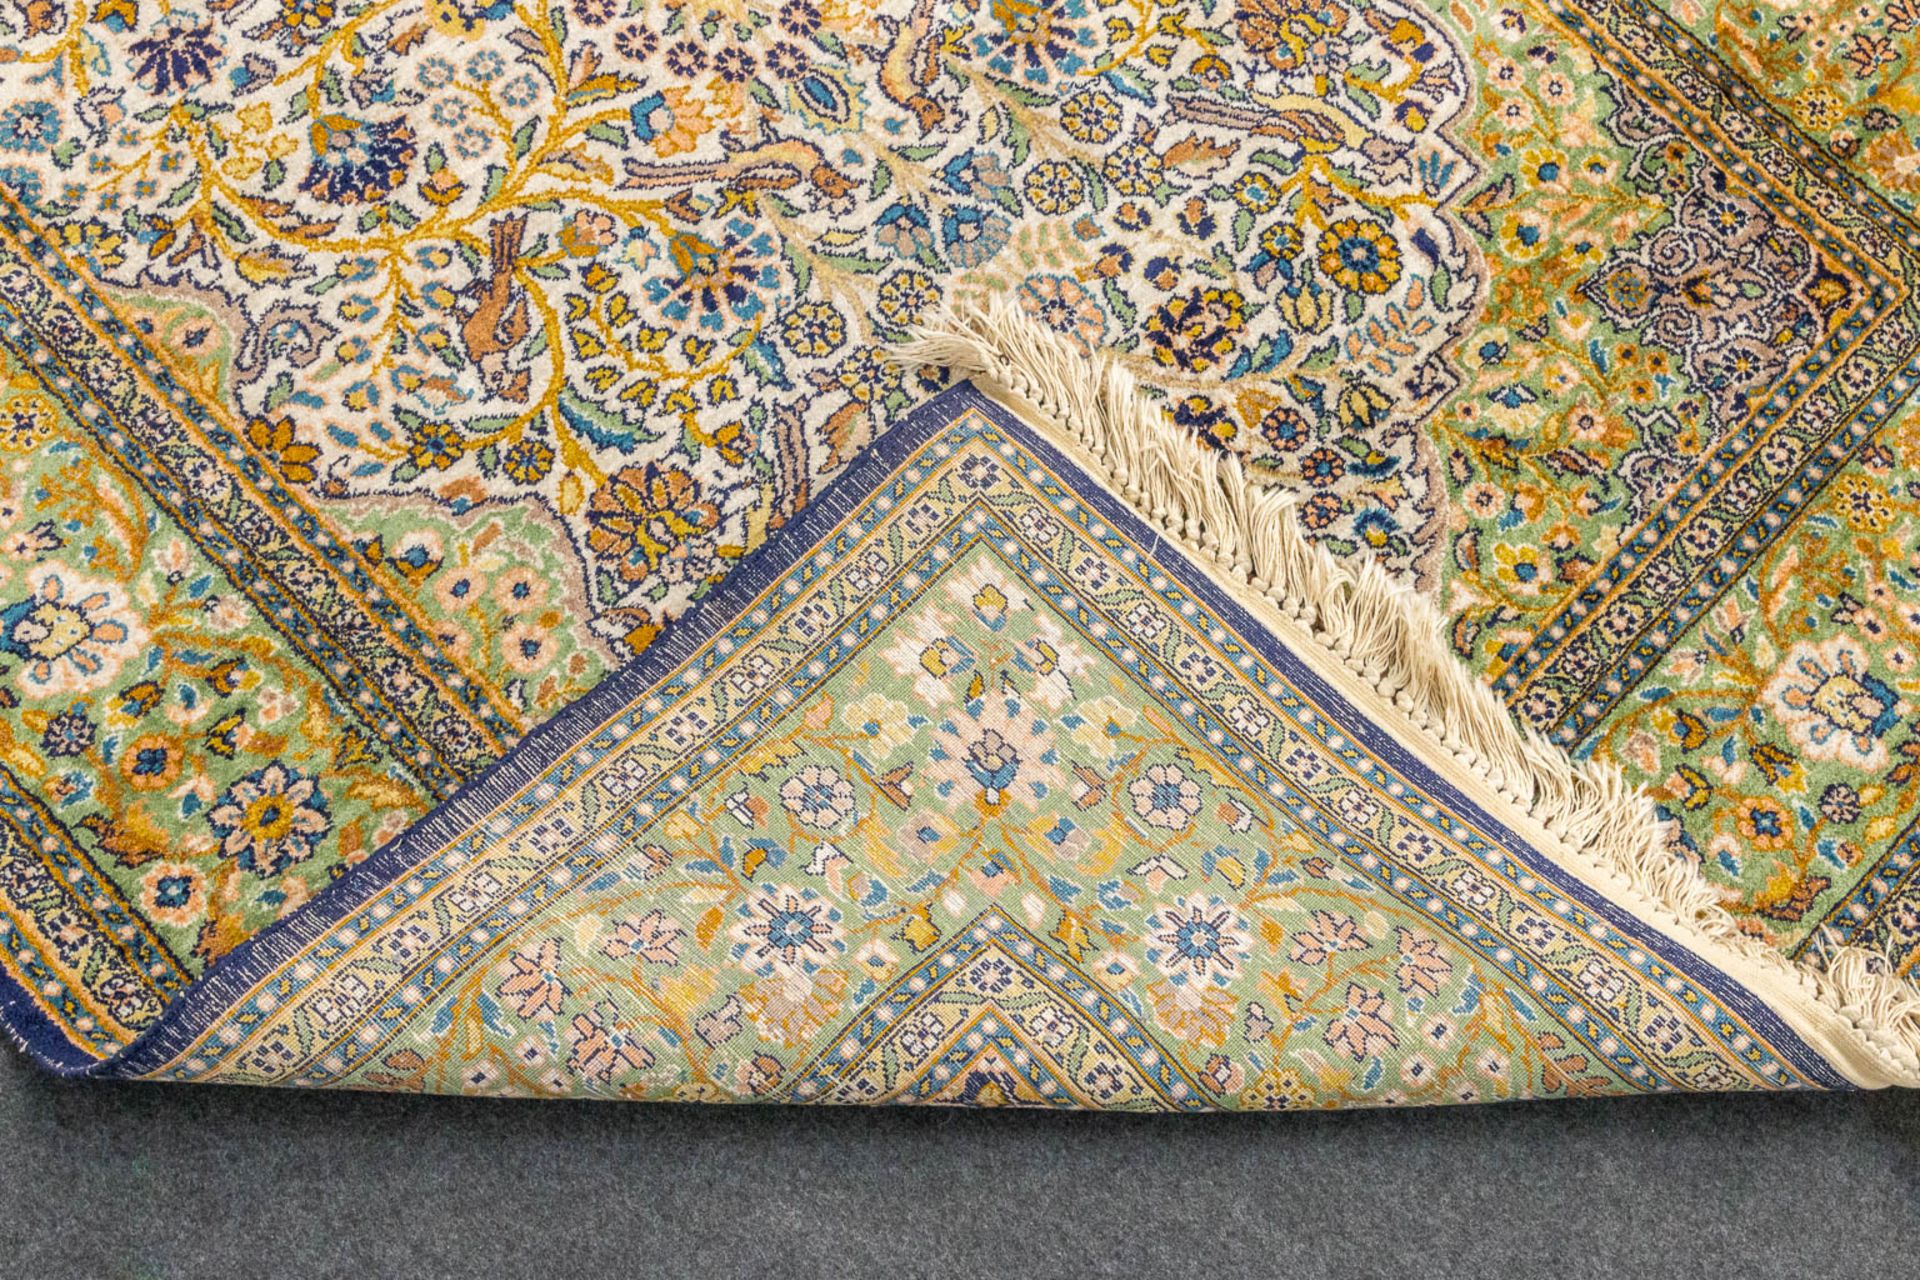 An Oriental, hand-made carpet, 'Isfahan' 181 x 124 - Image 5 of 7